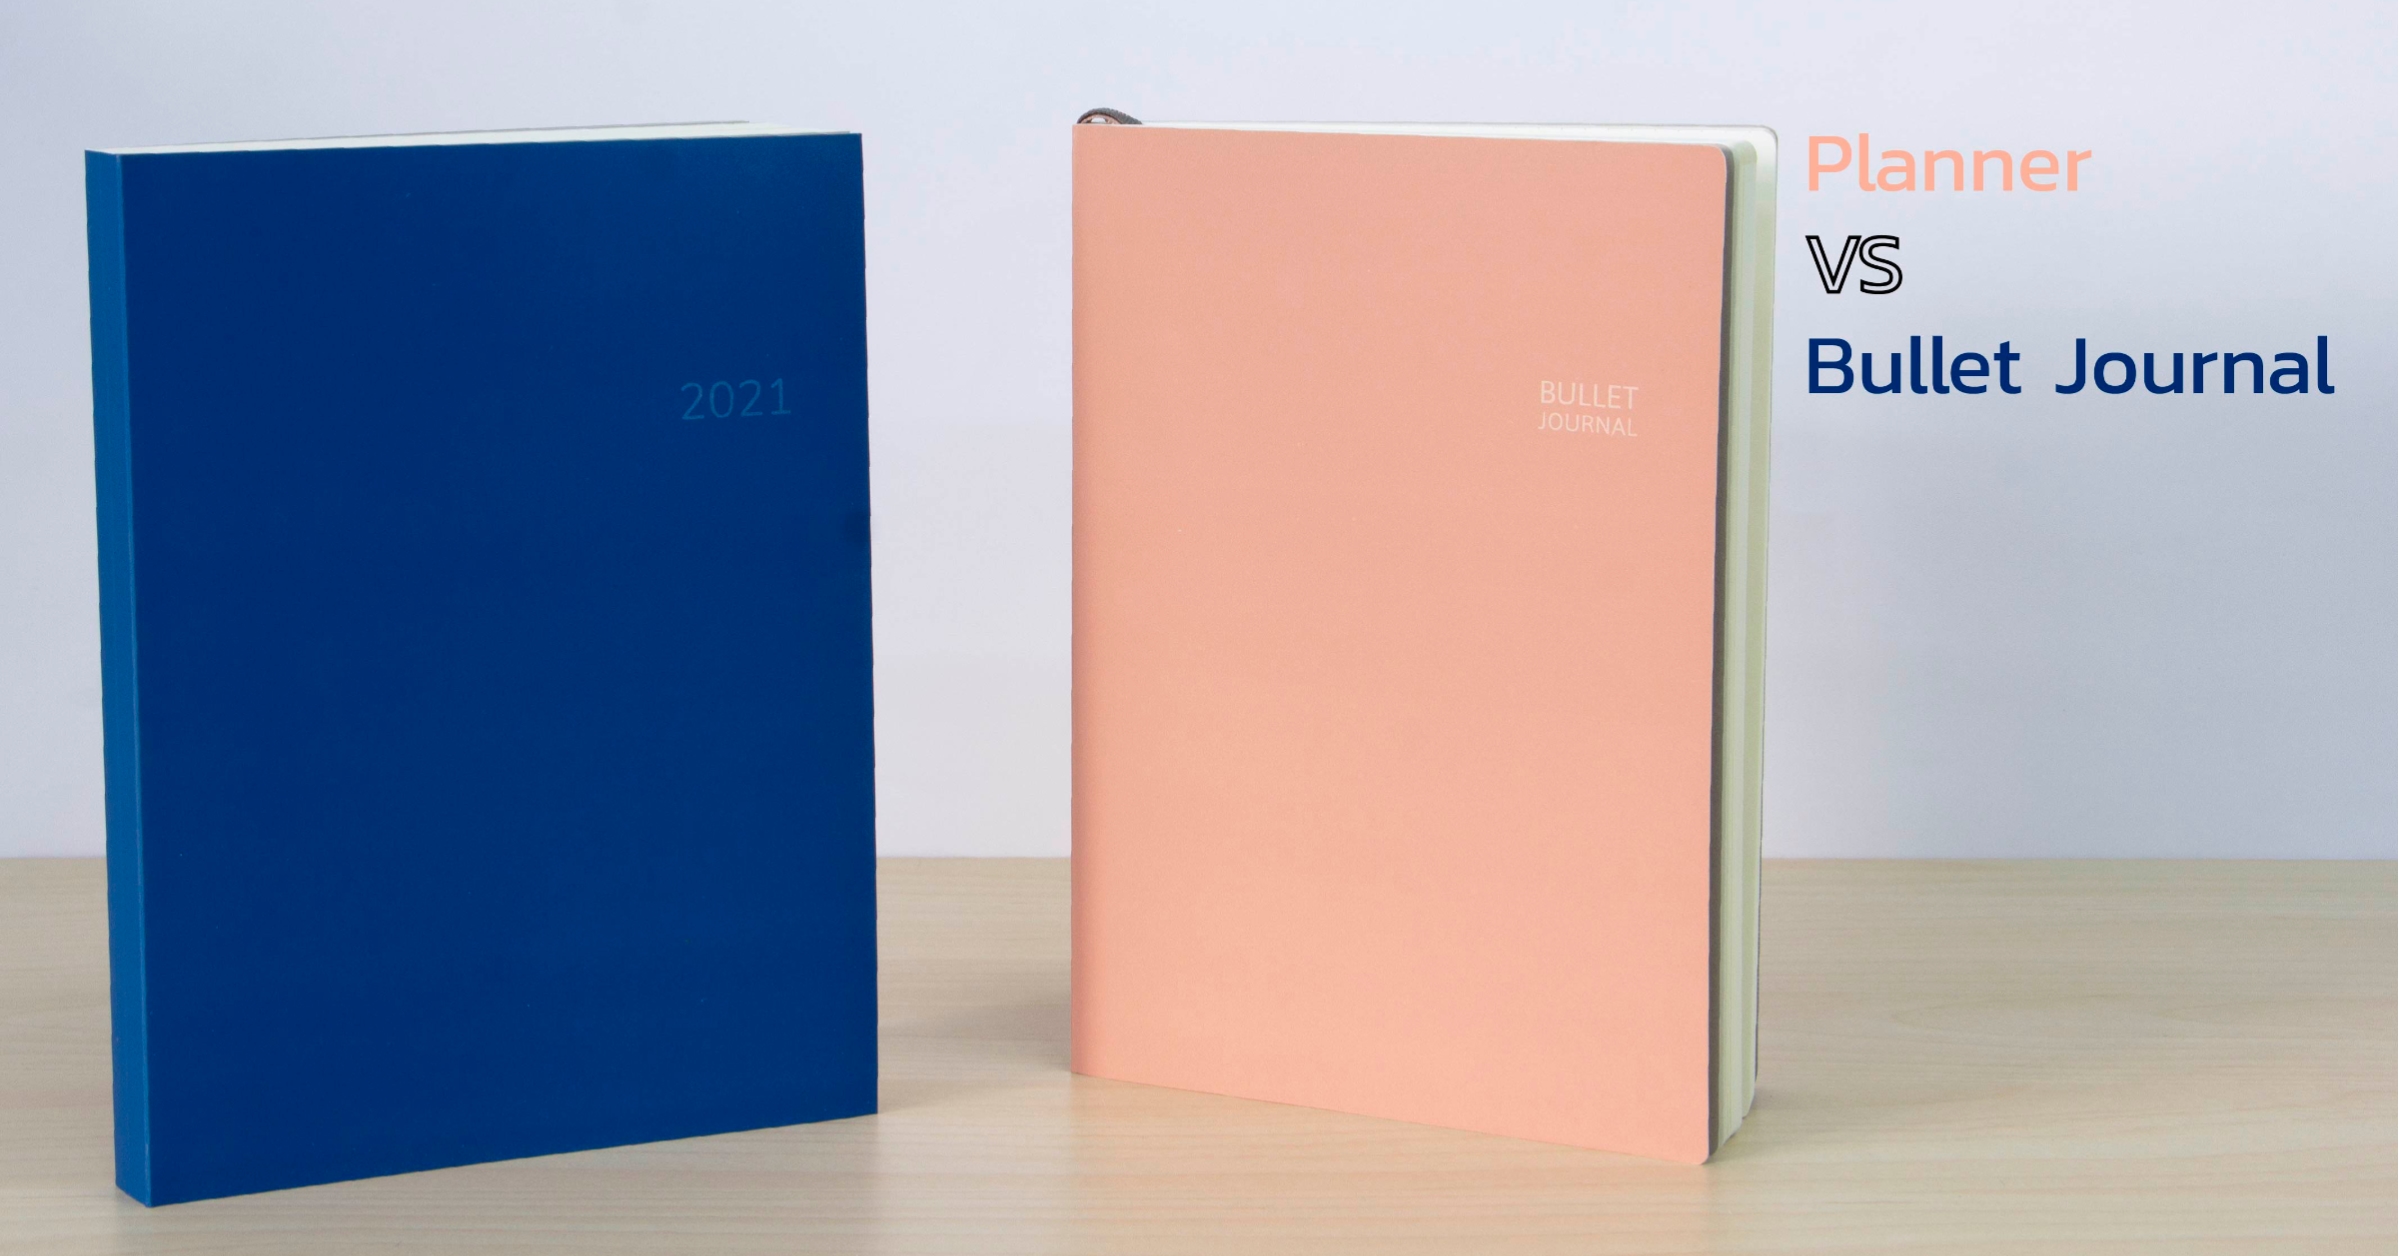 Planner VS Bullet Journal: Which one is right for you?